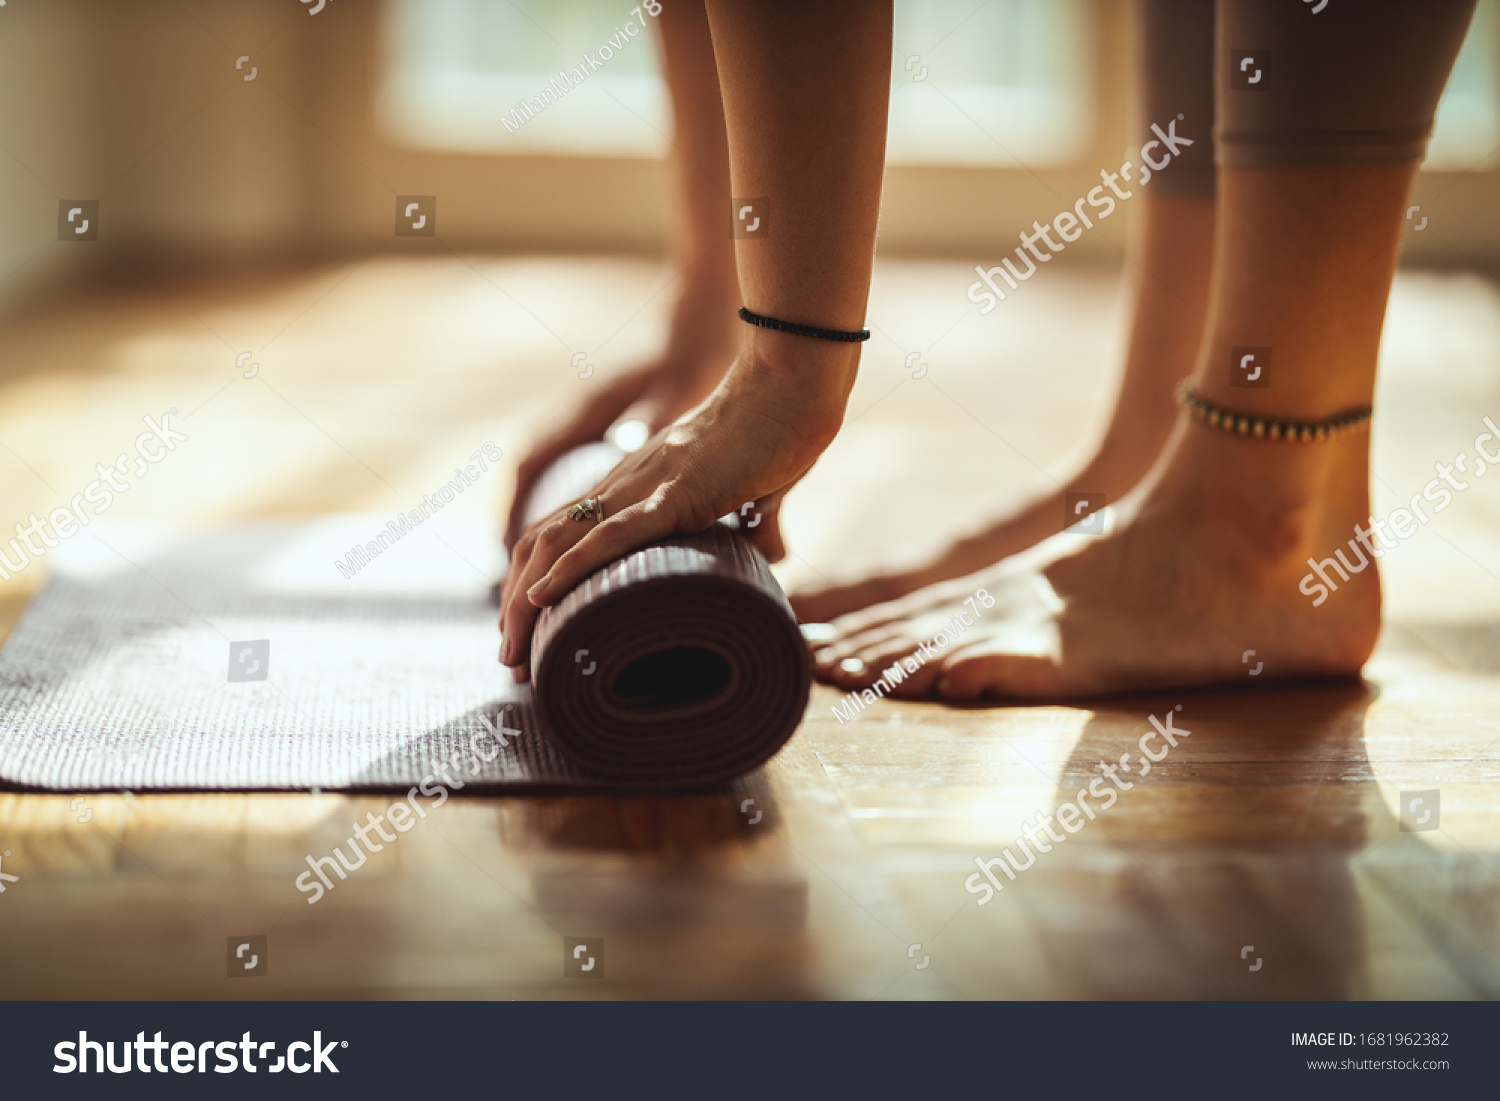 Close up of a womans hands is rolling up exercise mat and preparing to doing yoga. She is exercising on floor mat in morning sunshine at home. #1681962382